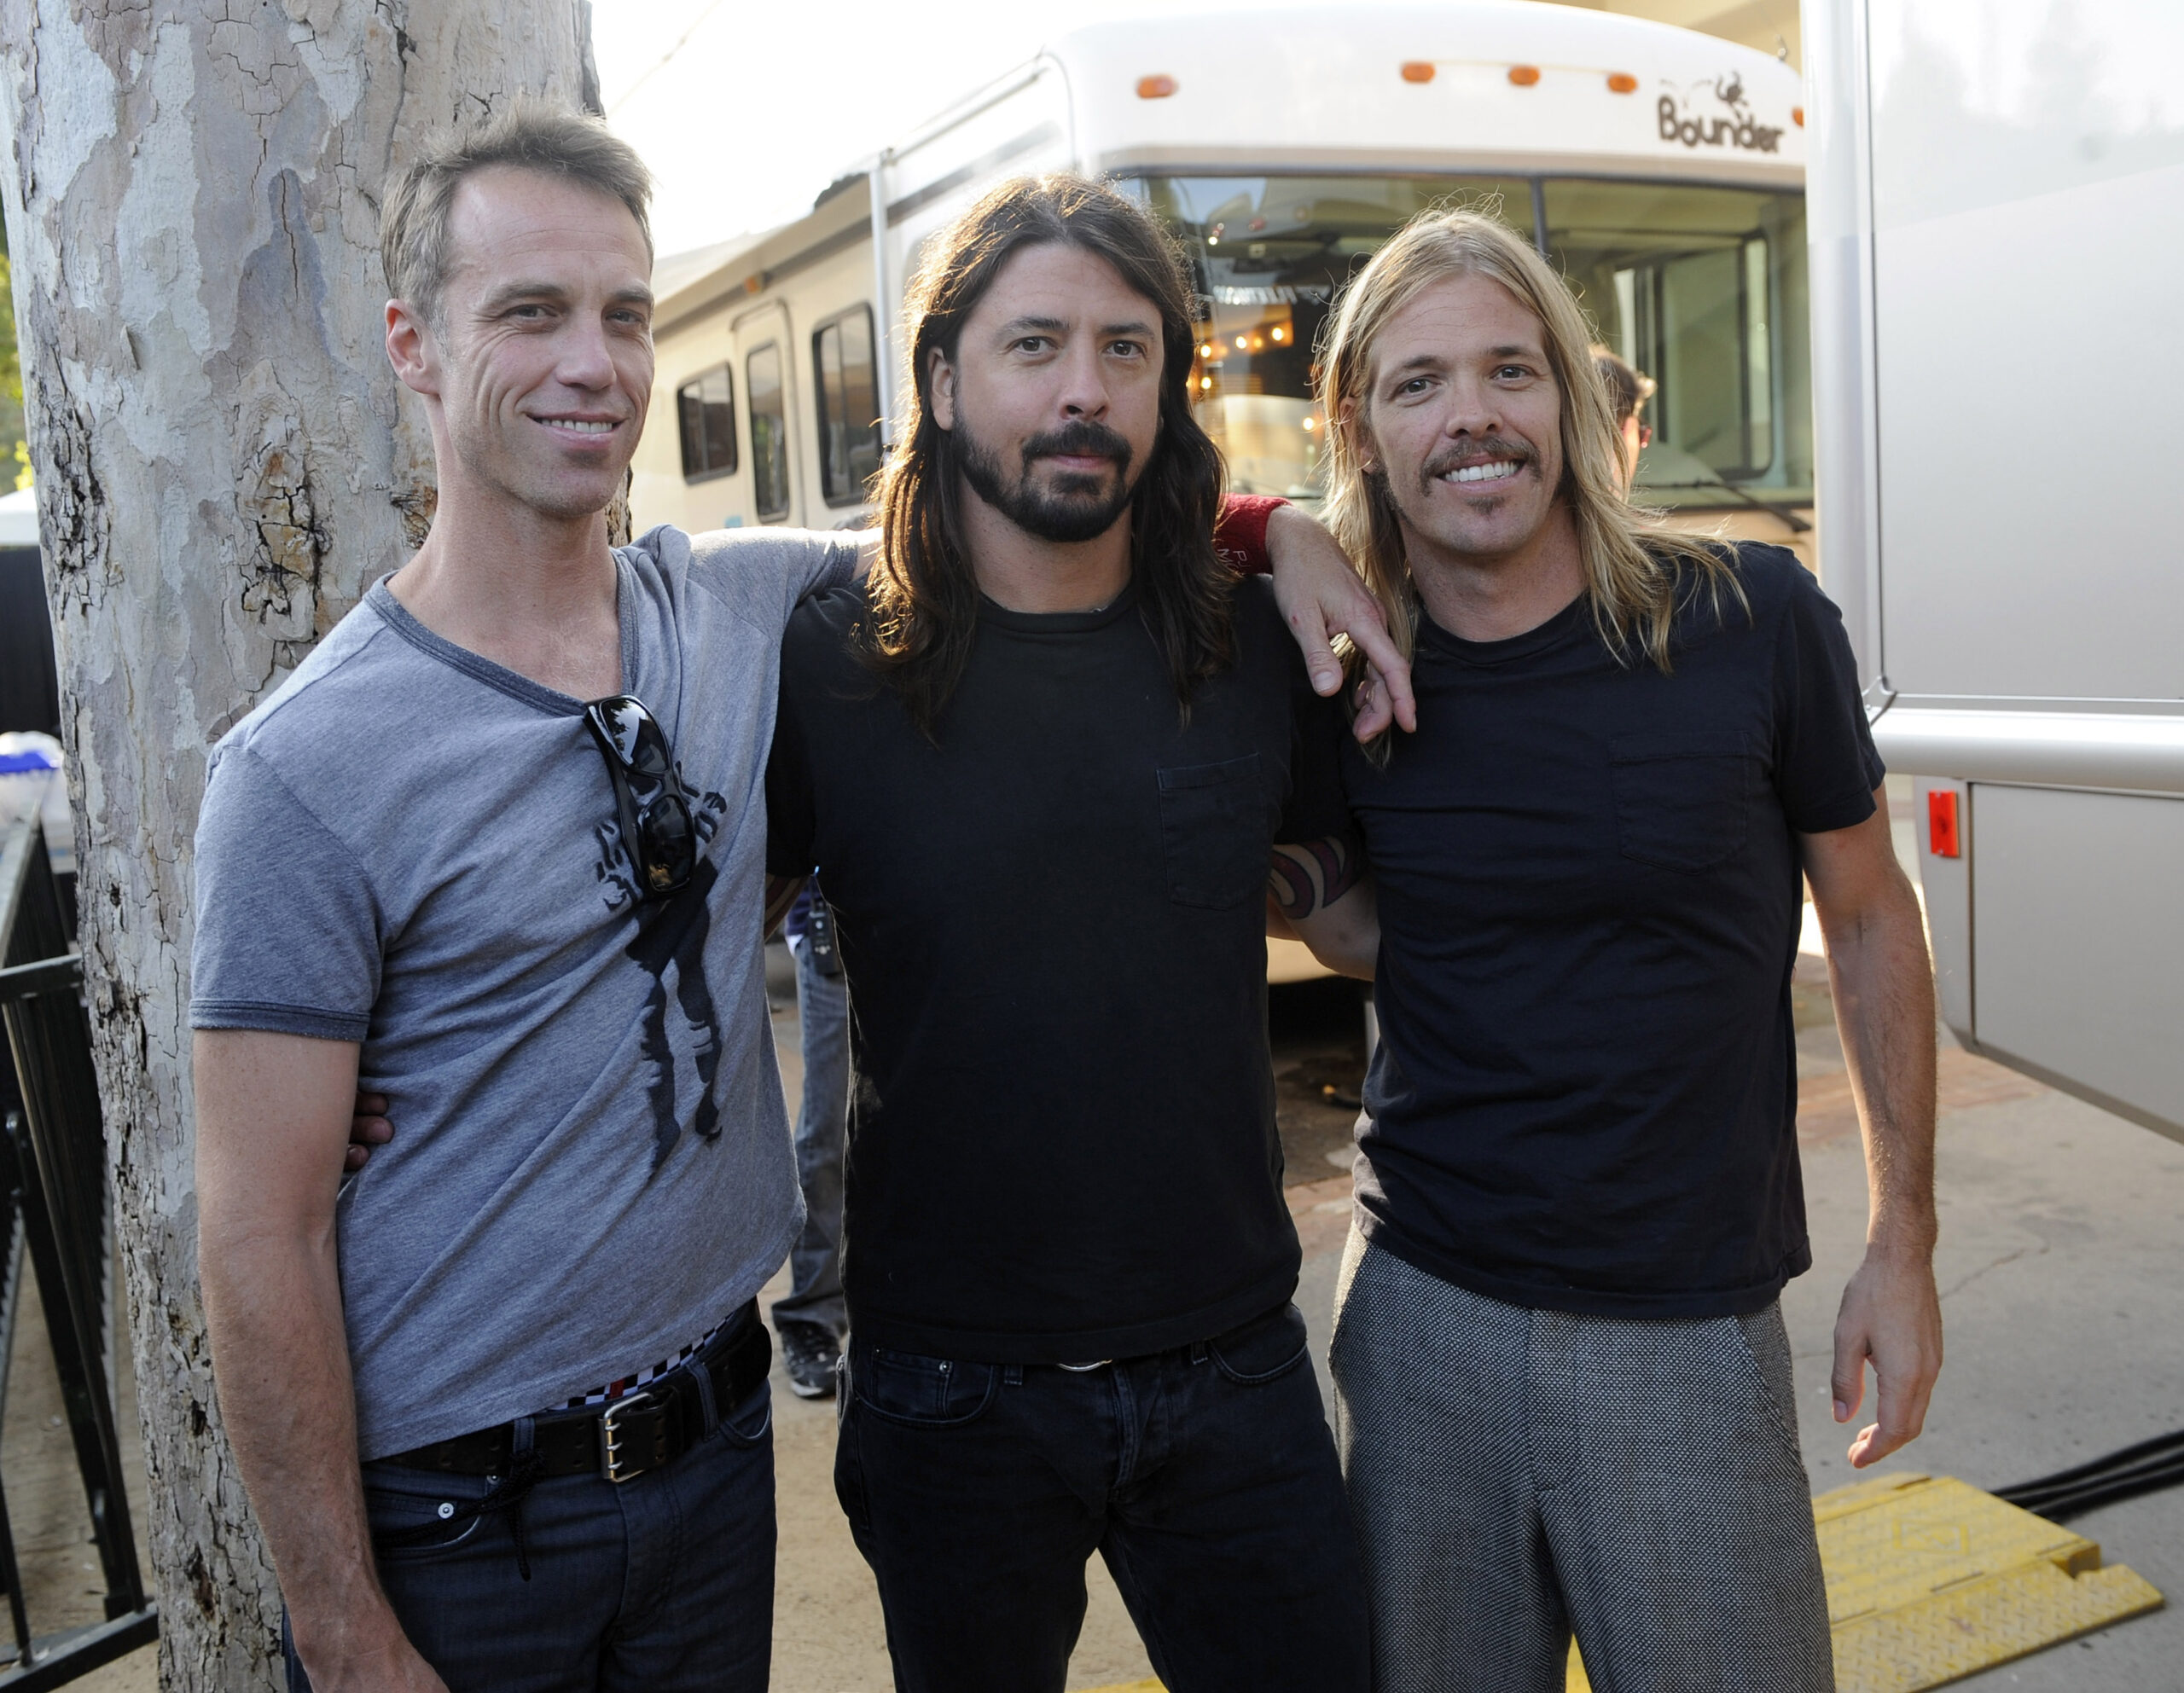 Matt Cameron, Dave Grohl, and Taylor Hawkins backstage at the 2008 VH1 Rock Honors in Los Angeles (photo: Kevin Mazur / WireImage).